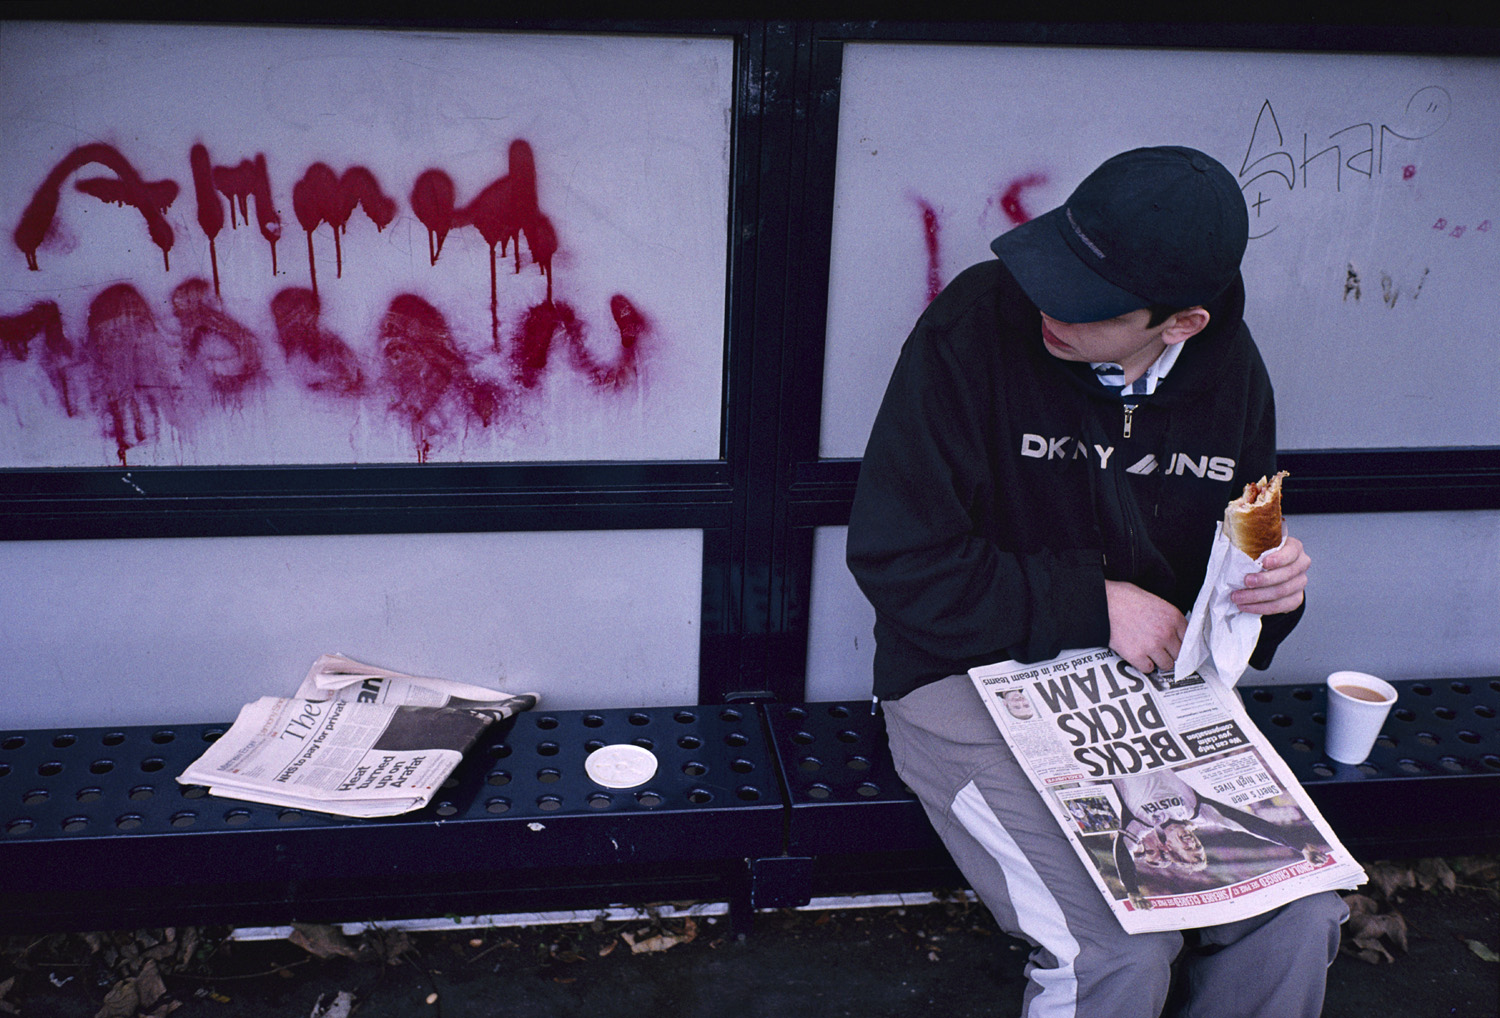 A young man sits on a bench at a train station, holding a bacon sandwich and reading a newspaper with graffiti on the wall behind him.